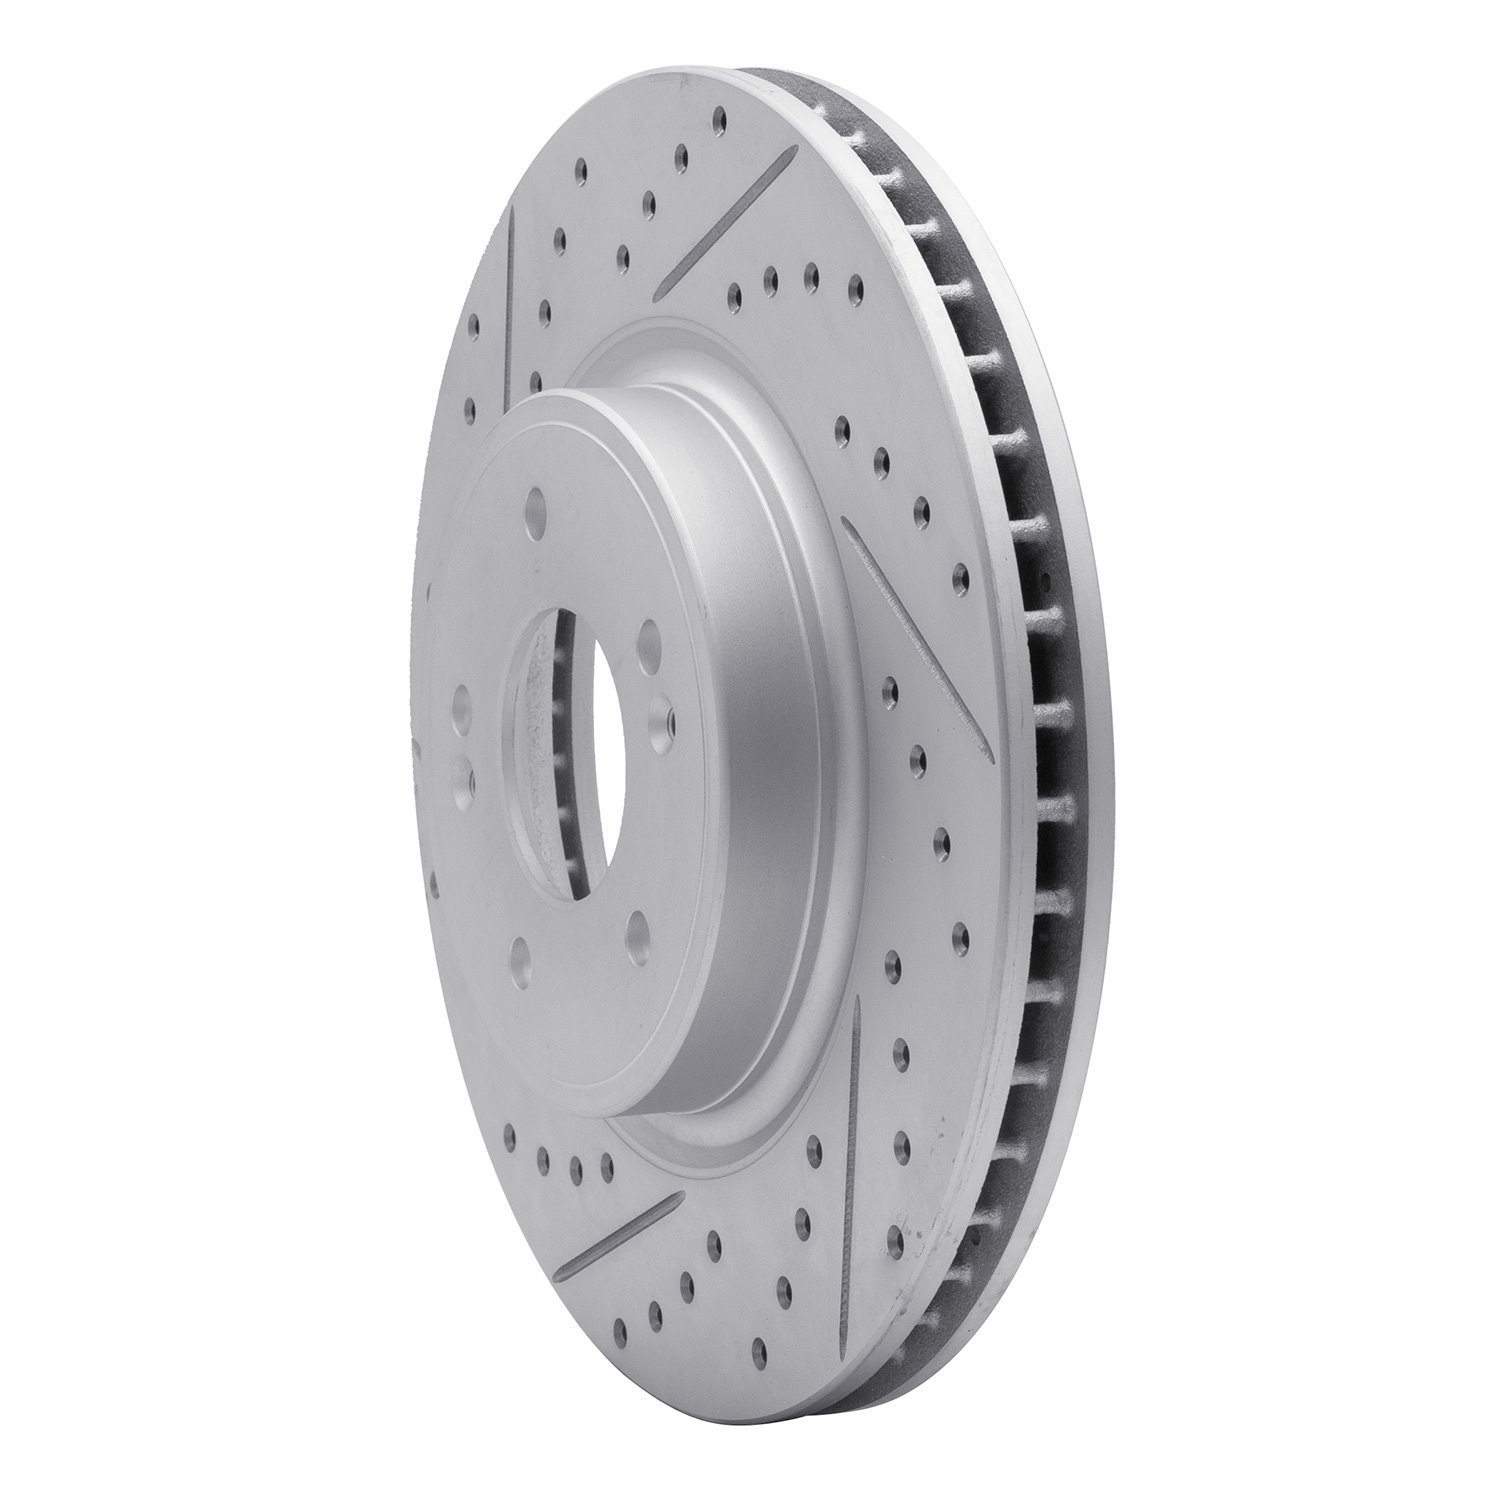 830-21040L Geoperformance Drilled/Slotted Brake Rotor, Fits Select Kia/Hyundai/Genesis, Position: Front Left